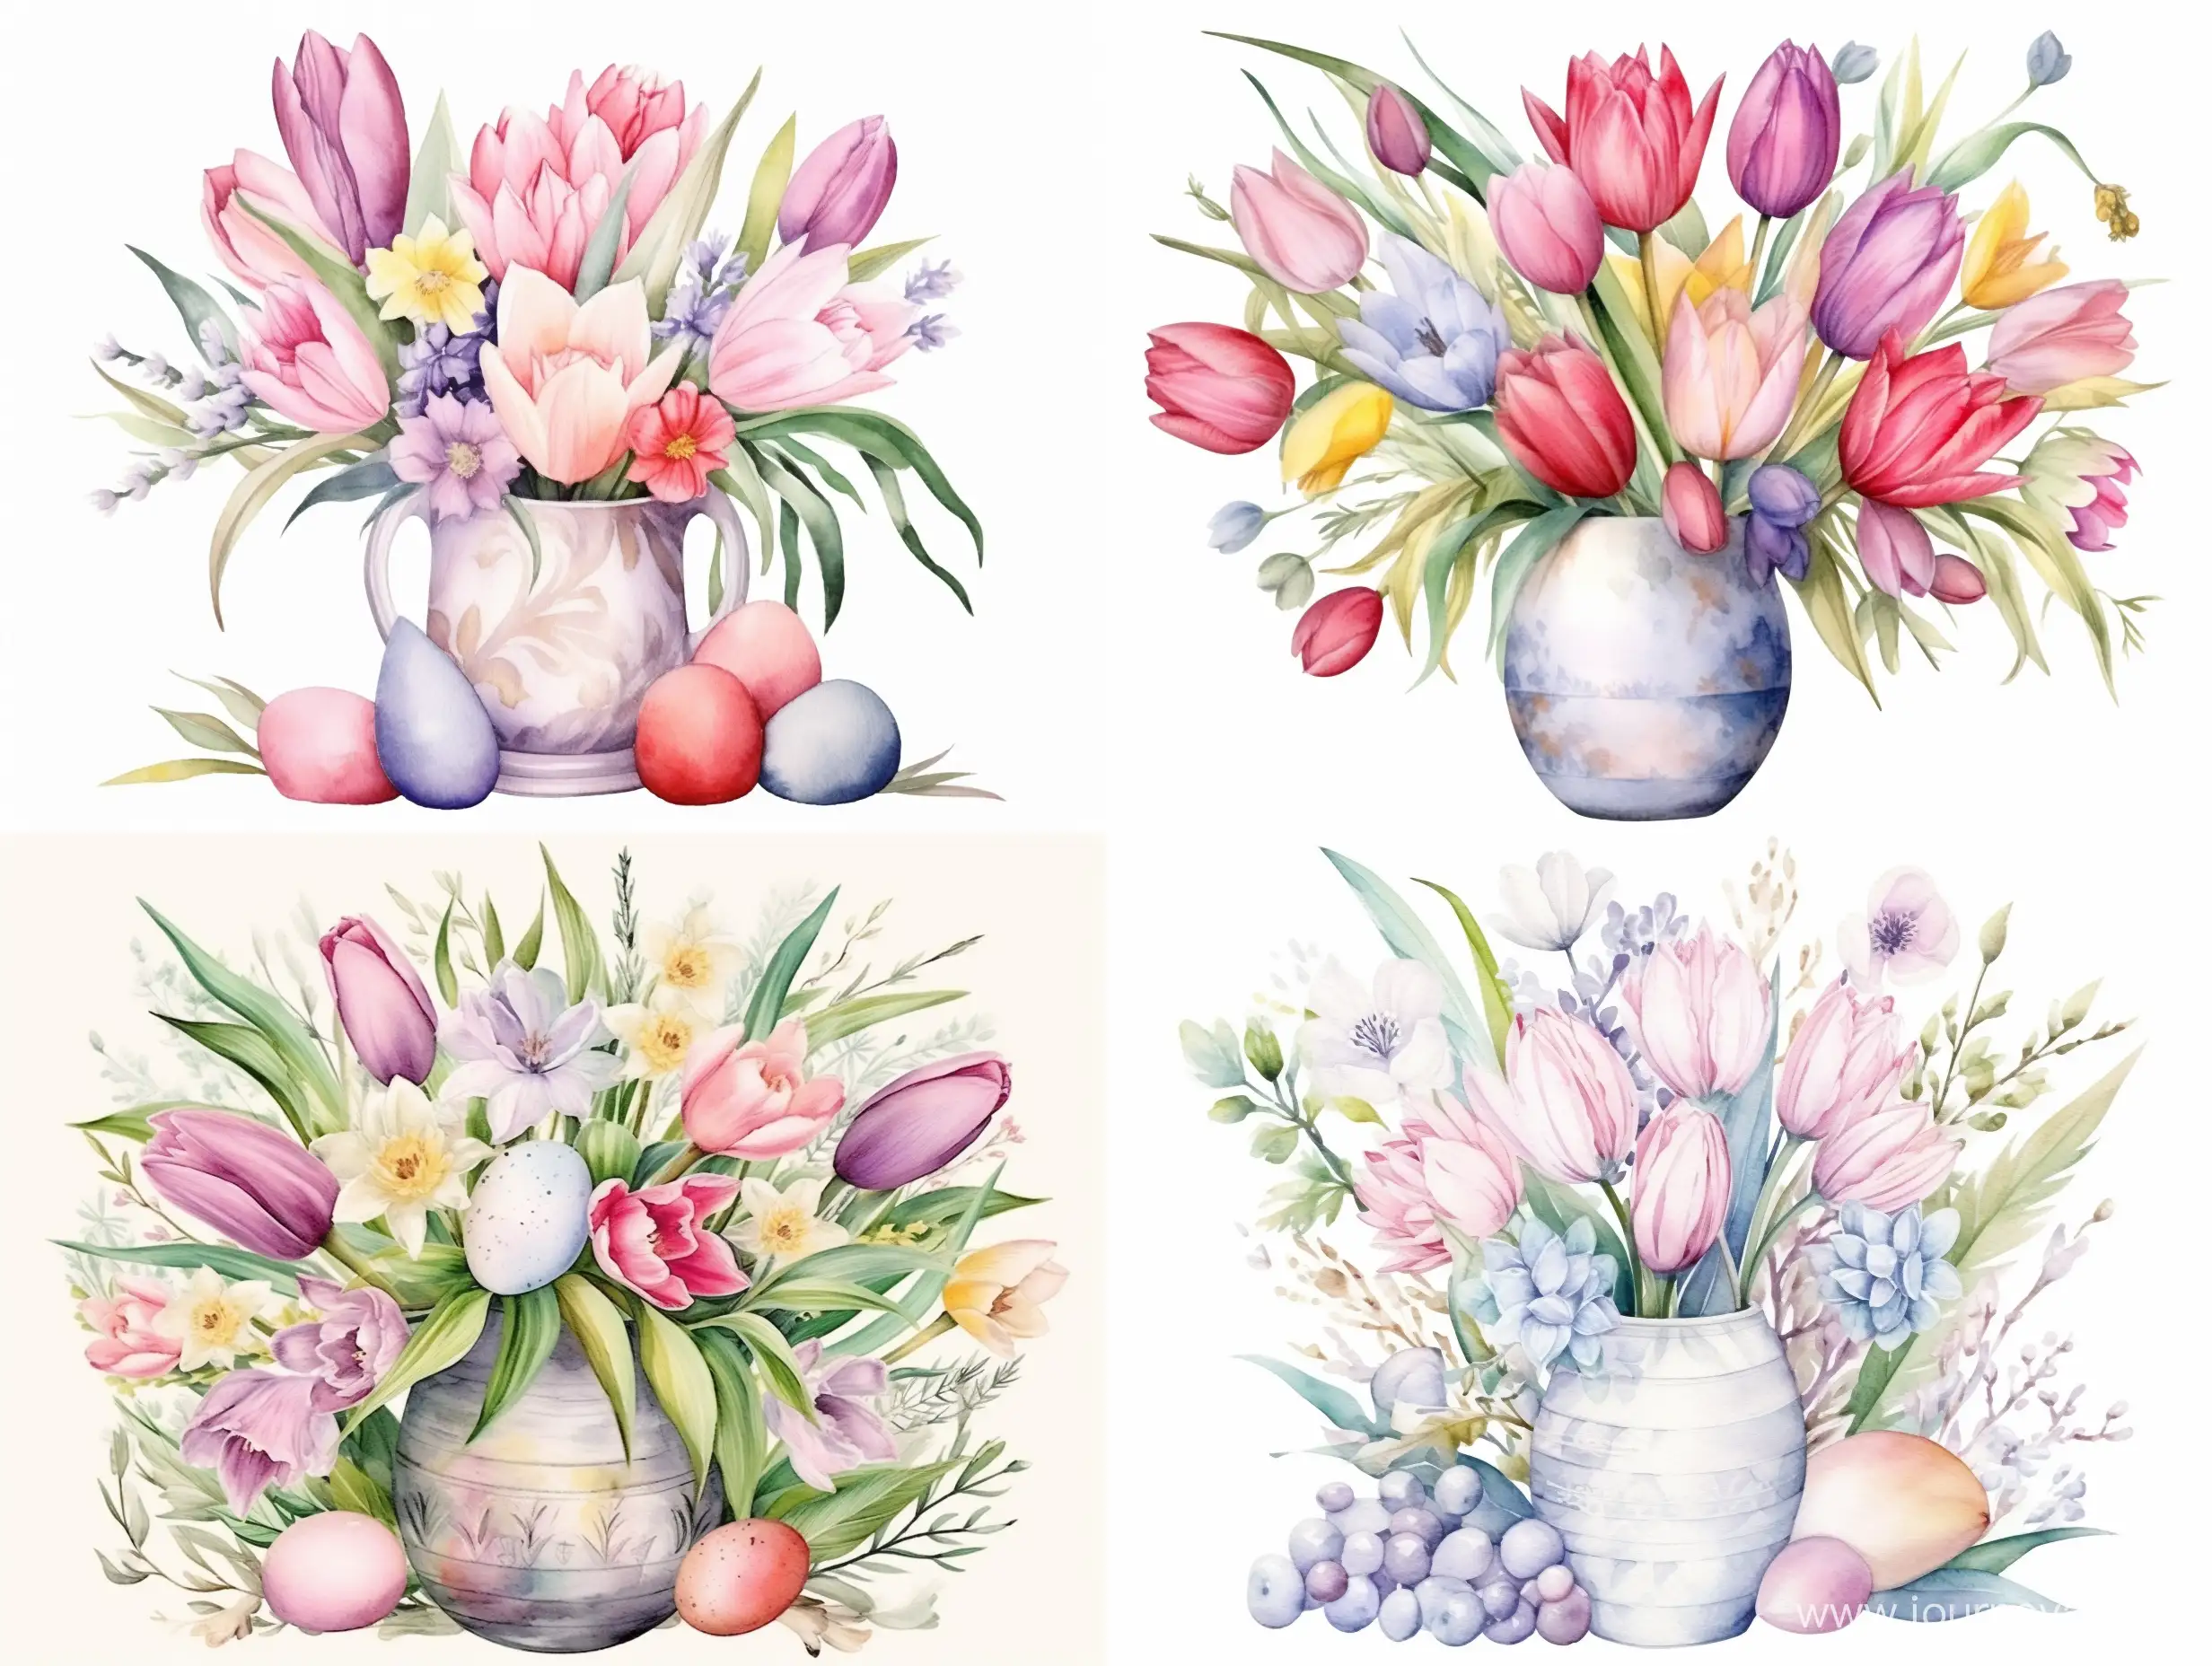 Boho-Watercolor-Easter-Vase-Vibrant-Flowers-Feathers-and-Eggs-for-April-Spring-Decor